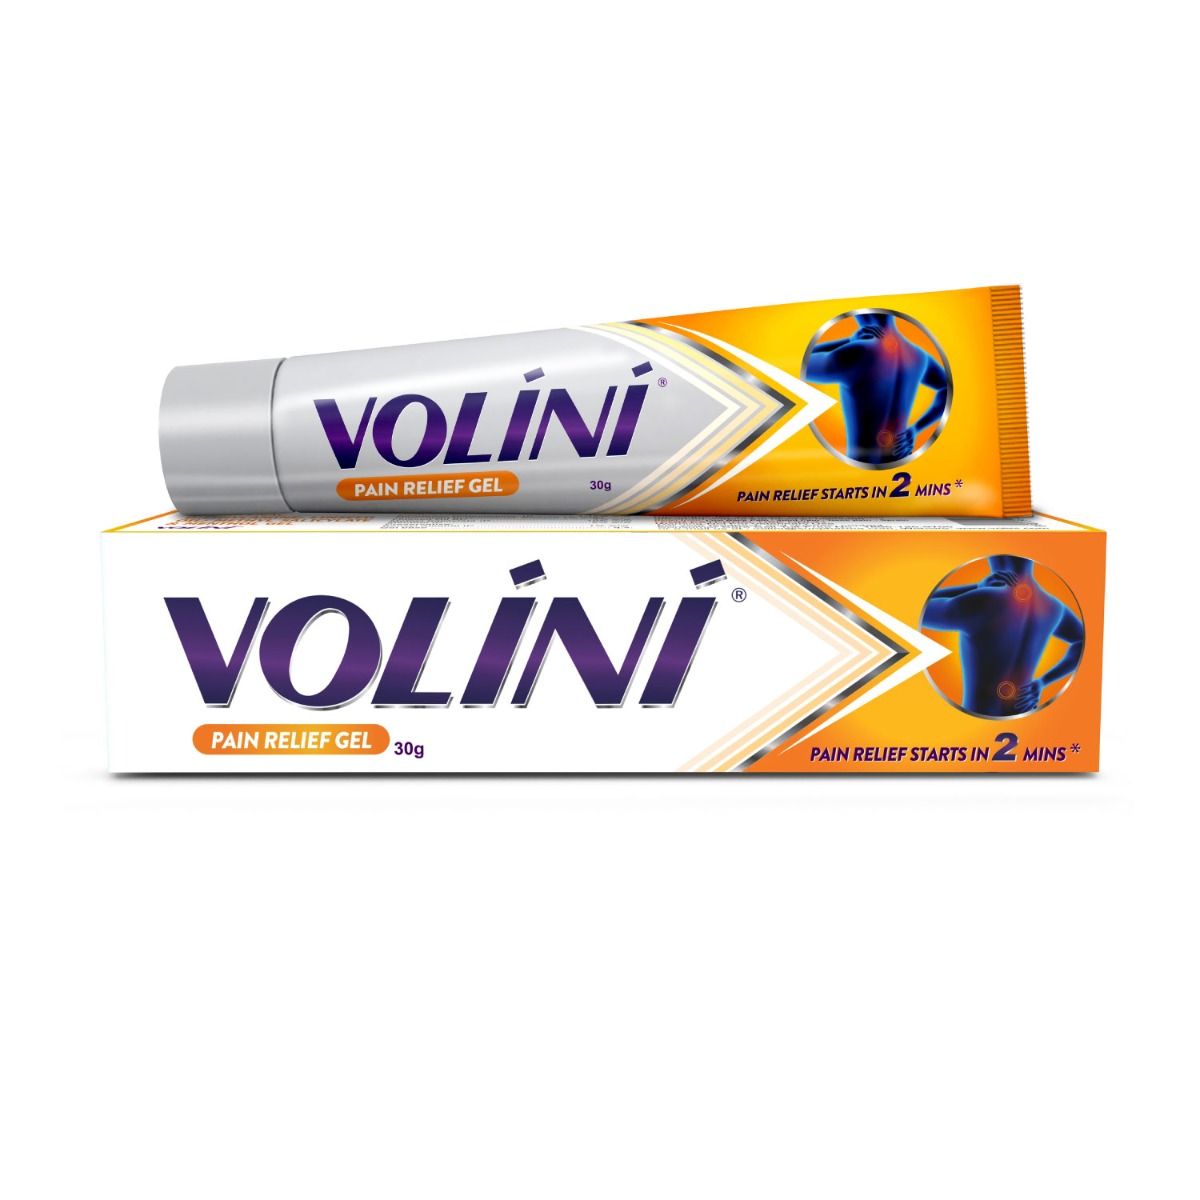 Volini Pain Relief Gel, 30 gm Price, Uses, Side Effects ...